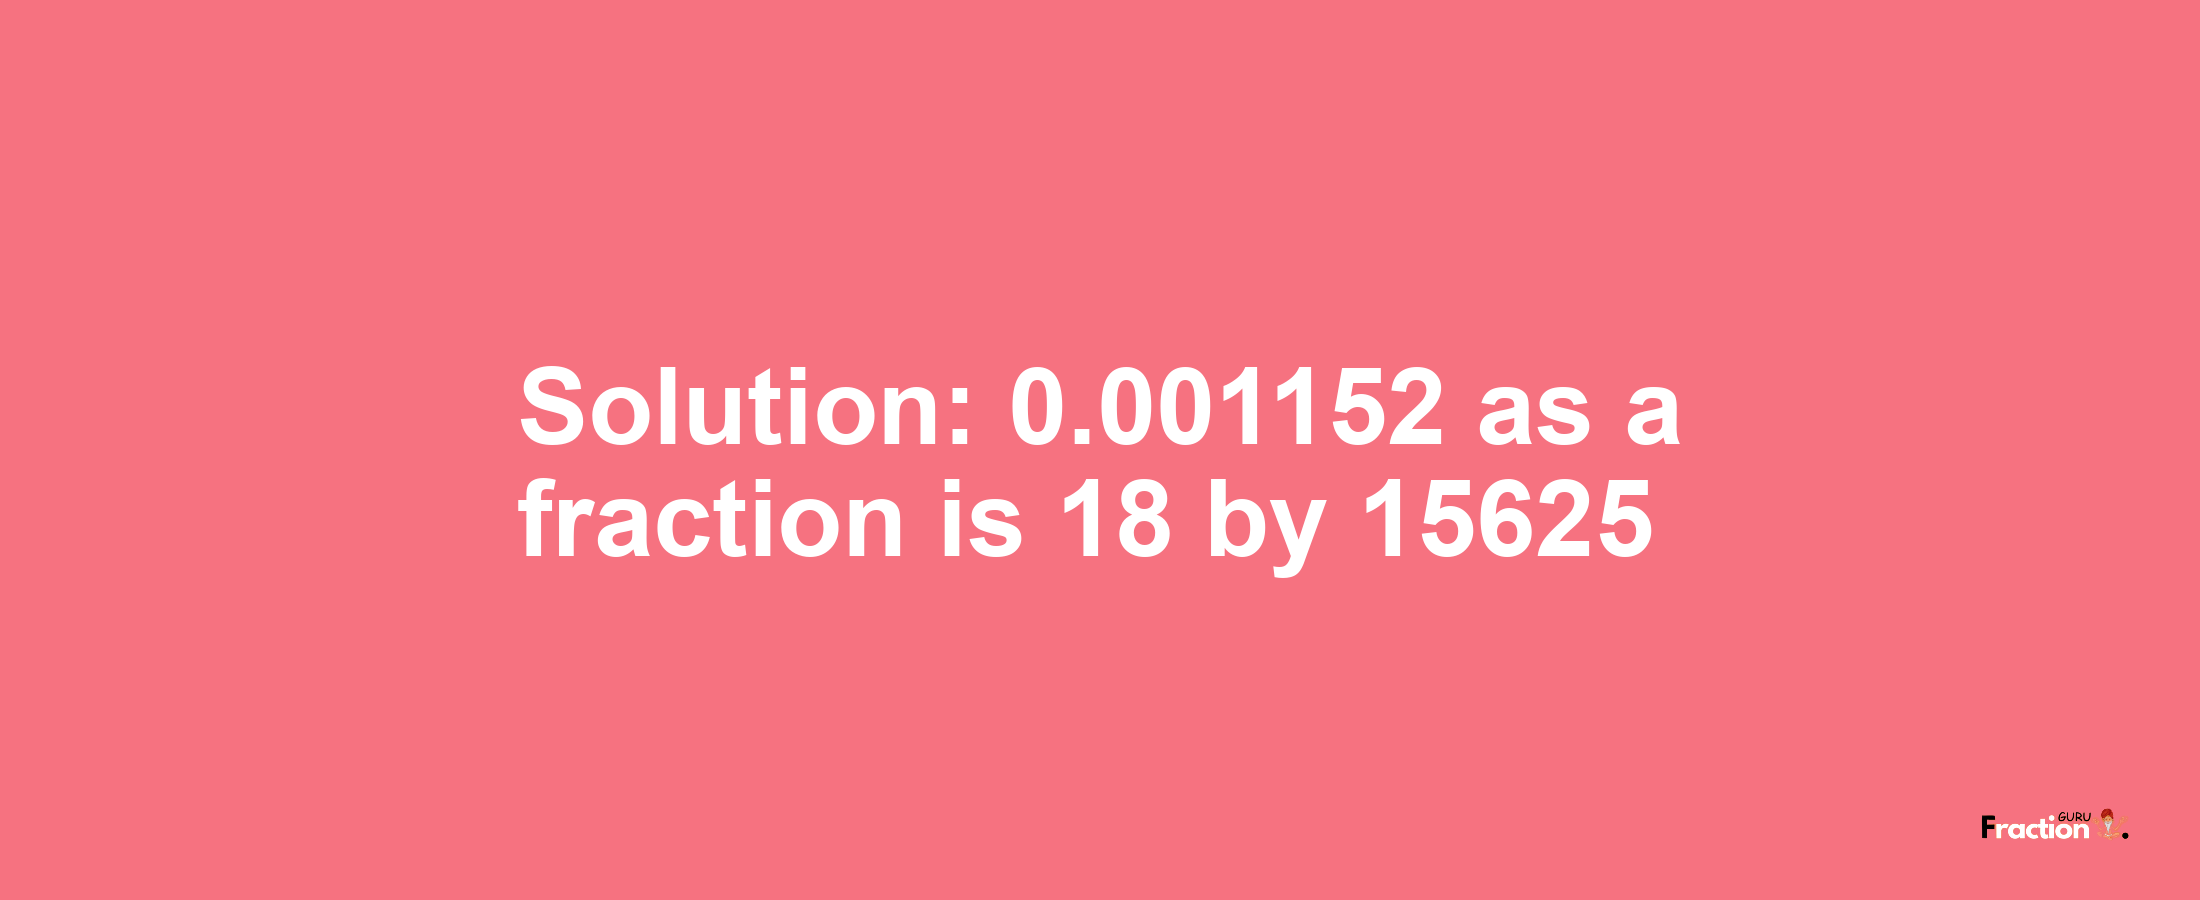 Solution:0.001152 as a fraction is 18/15625